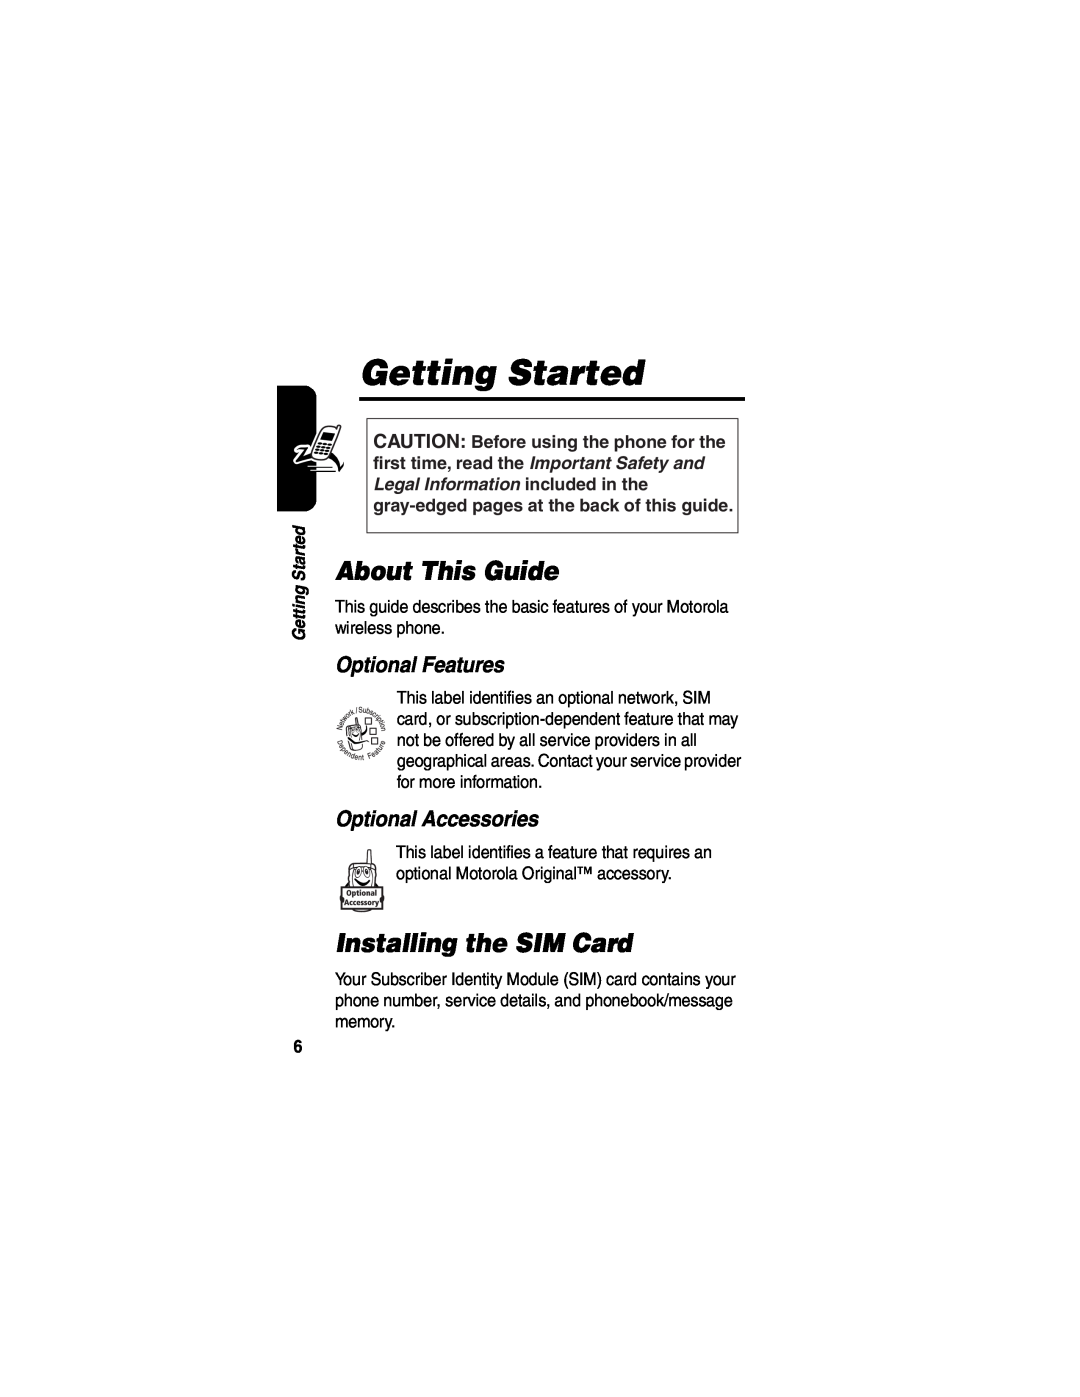 Motorola V555 manual Getting Started, About This Guide, Installing the SIM Card, Optional Features, Optional Accessories 